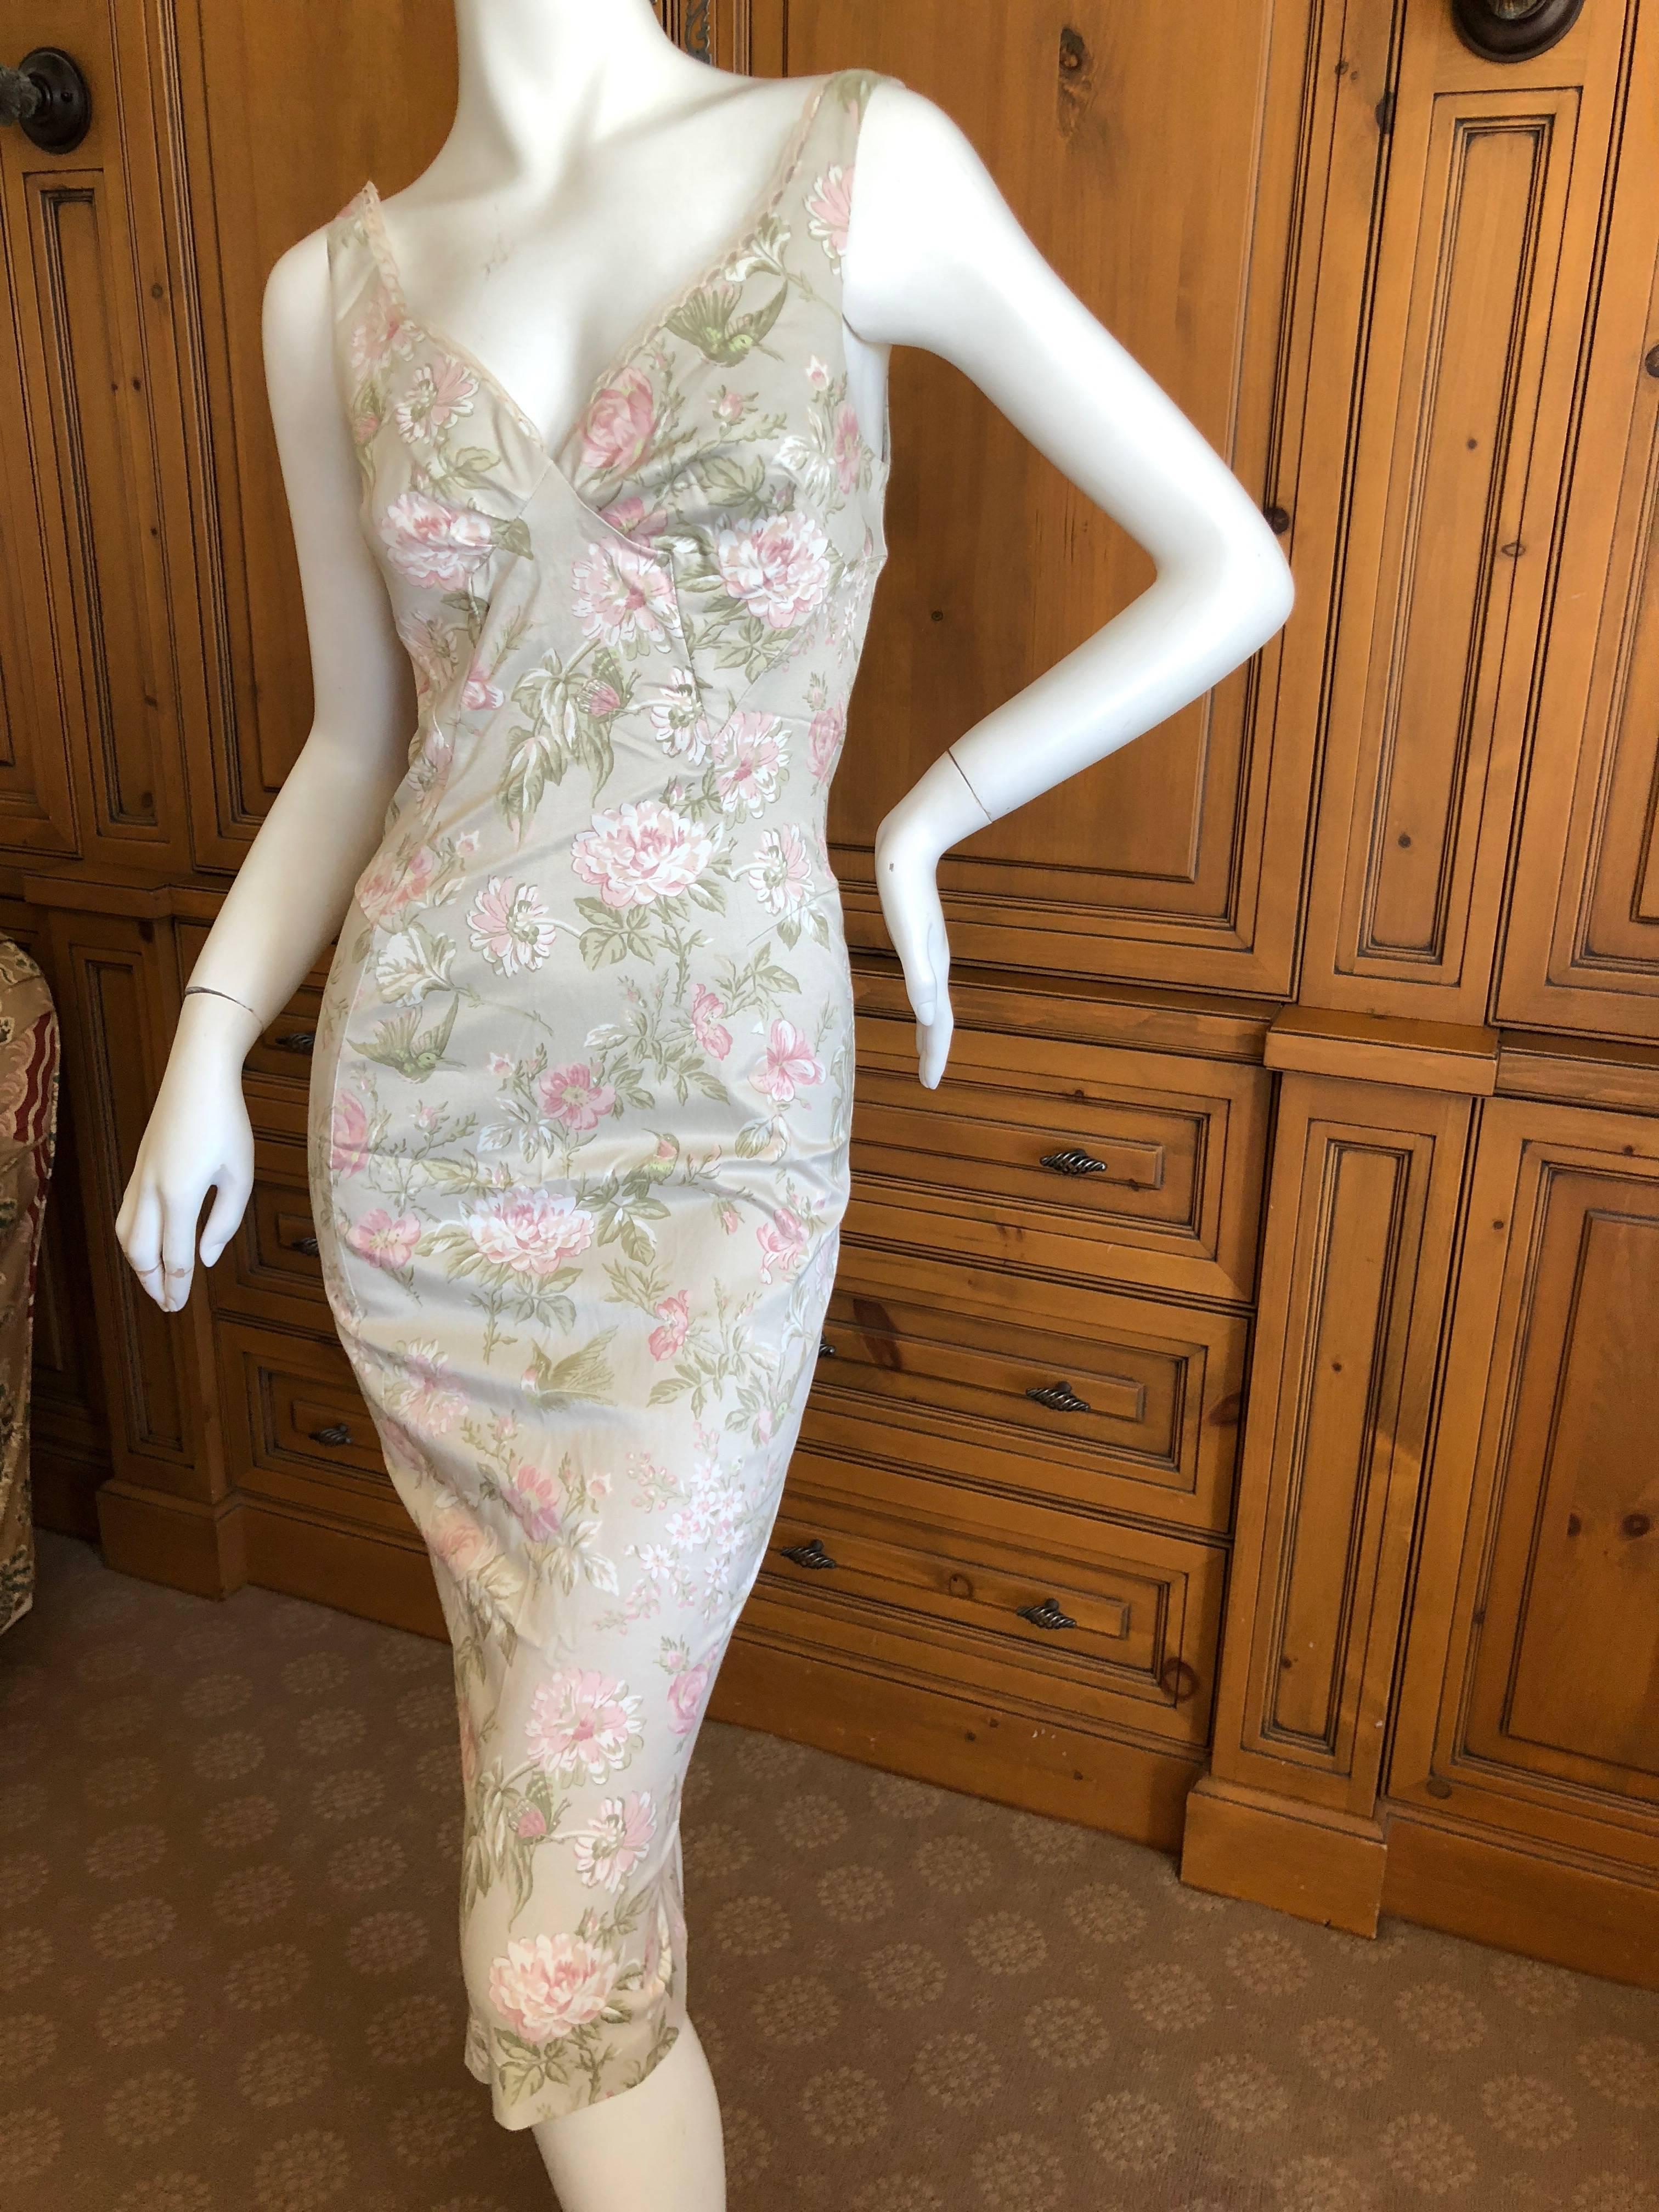 Dolce & Gabbana D&G Cotton Floral Pattern Lace Trim Cocktail Dress In Excellent Condition For Sale In Cloverdale, CA